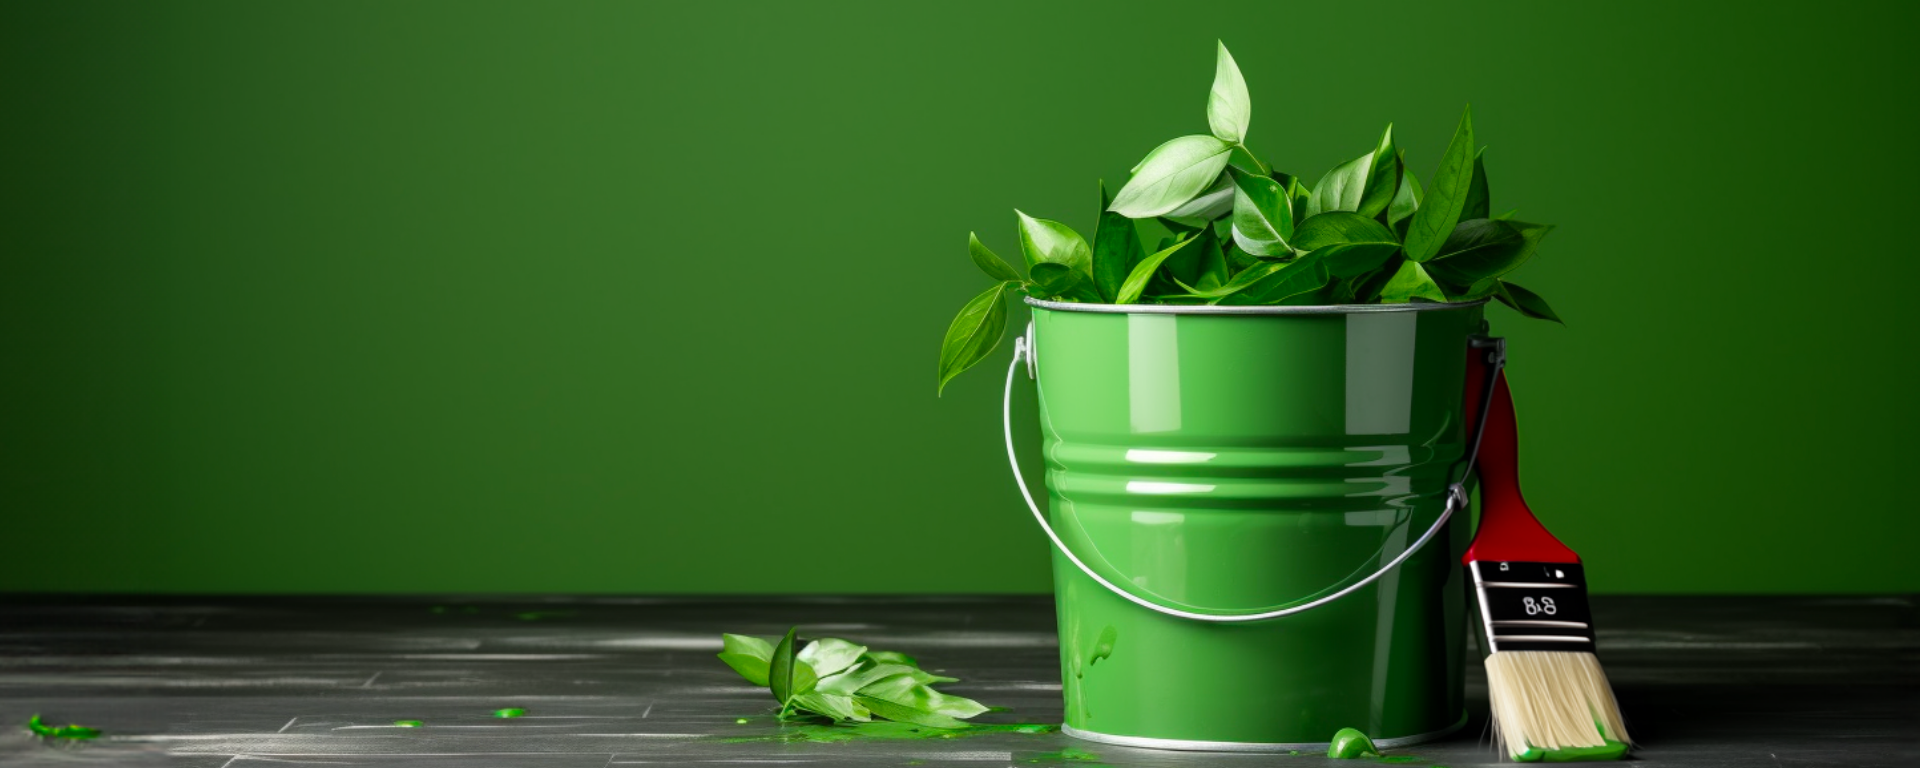 A vibrant green bucket filled with fresh, green leaves stands on a dark surface against a green background, accompanied by a paintbrush with a red handle to its right, representing an example of green marketing.